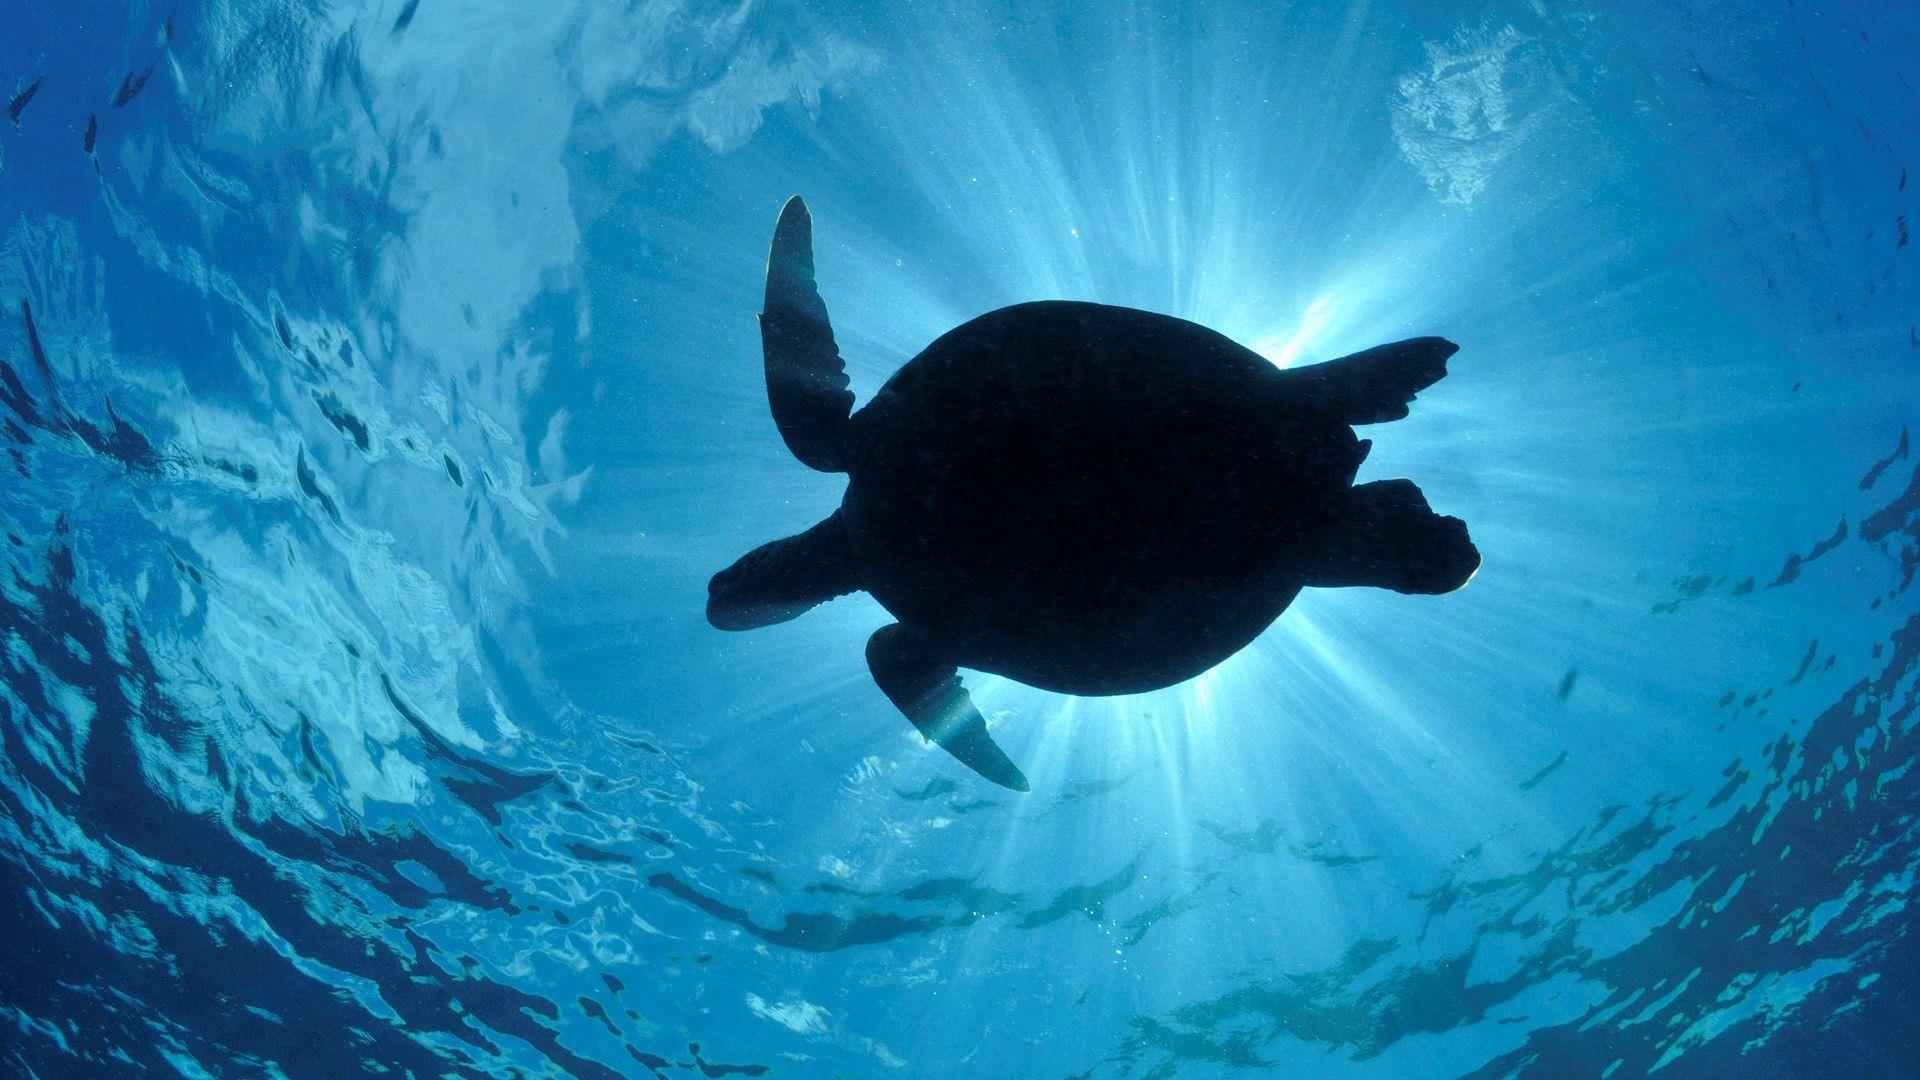 Sea Turtles Wallpaper background picture